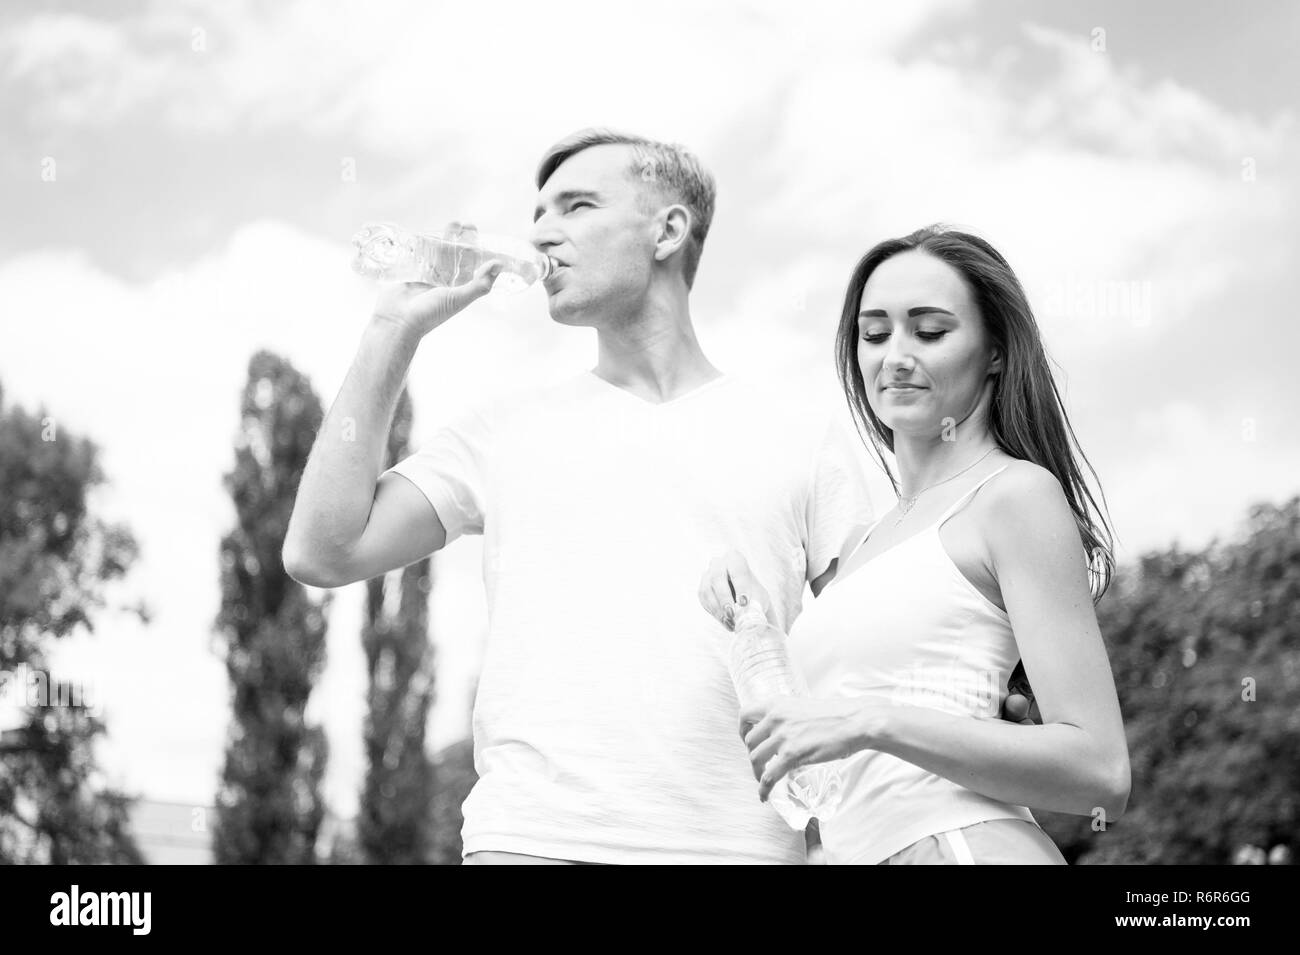 Sport and health. Summer activity and energy. Couple of coach relax after workout. Girl and guy sunny outdoor. Woman and man drink water from bottle. Stock Photo